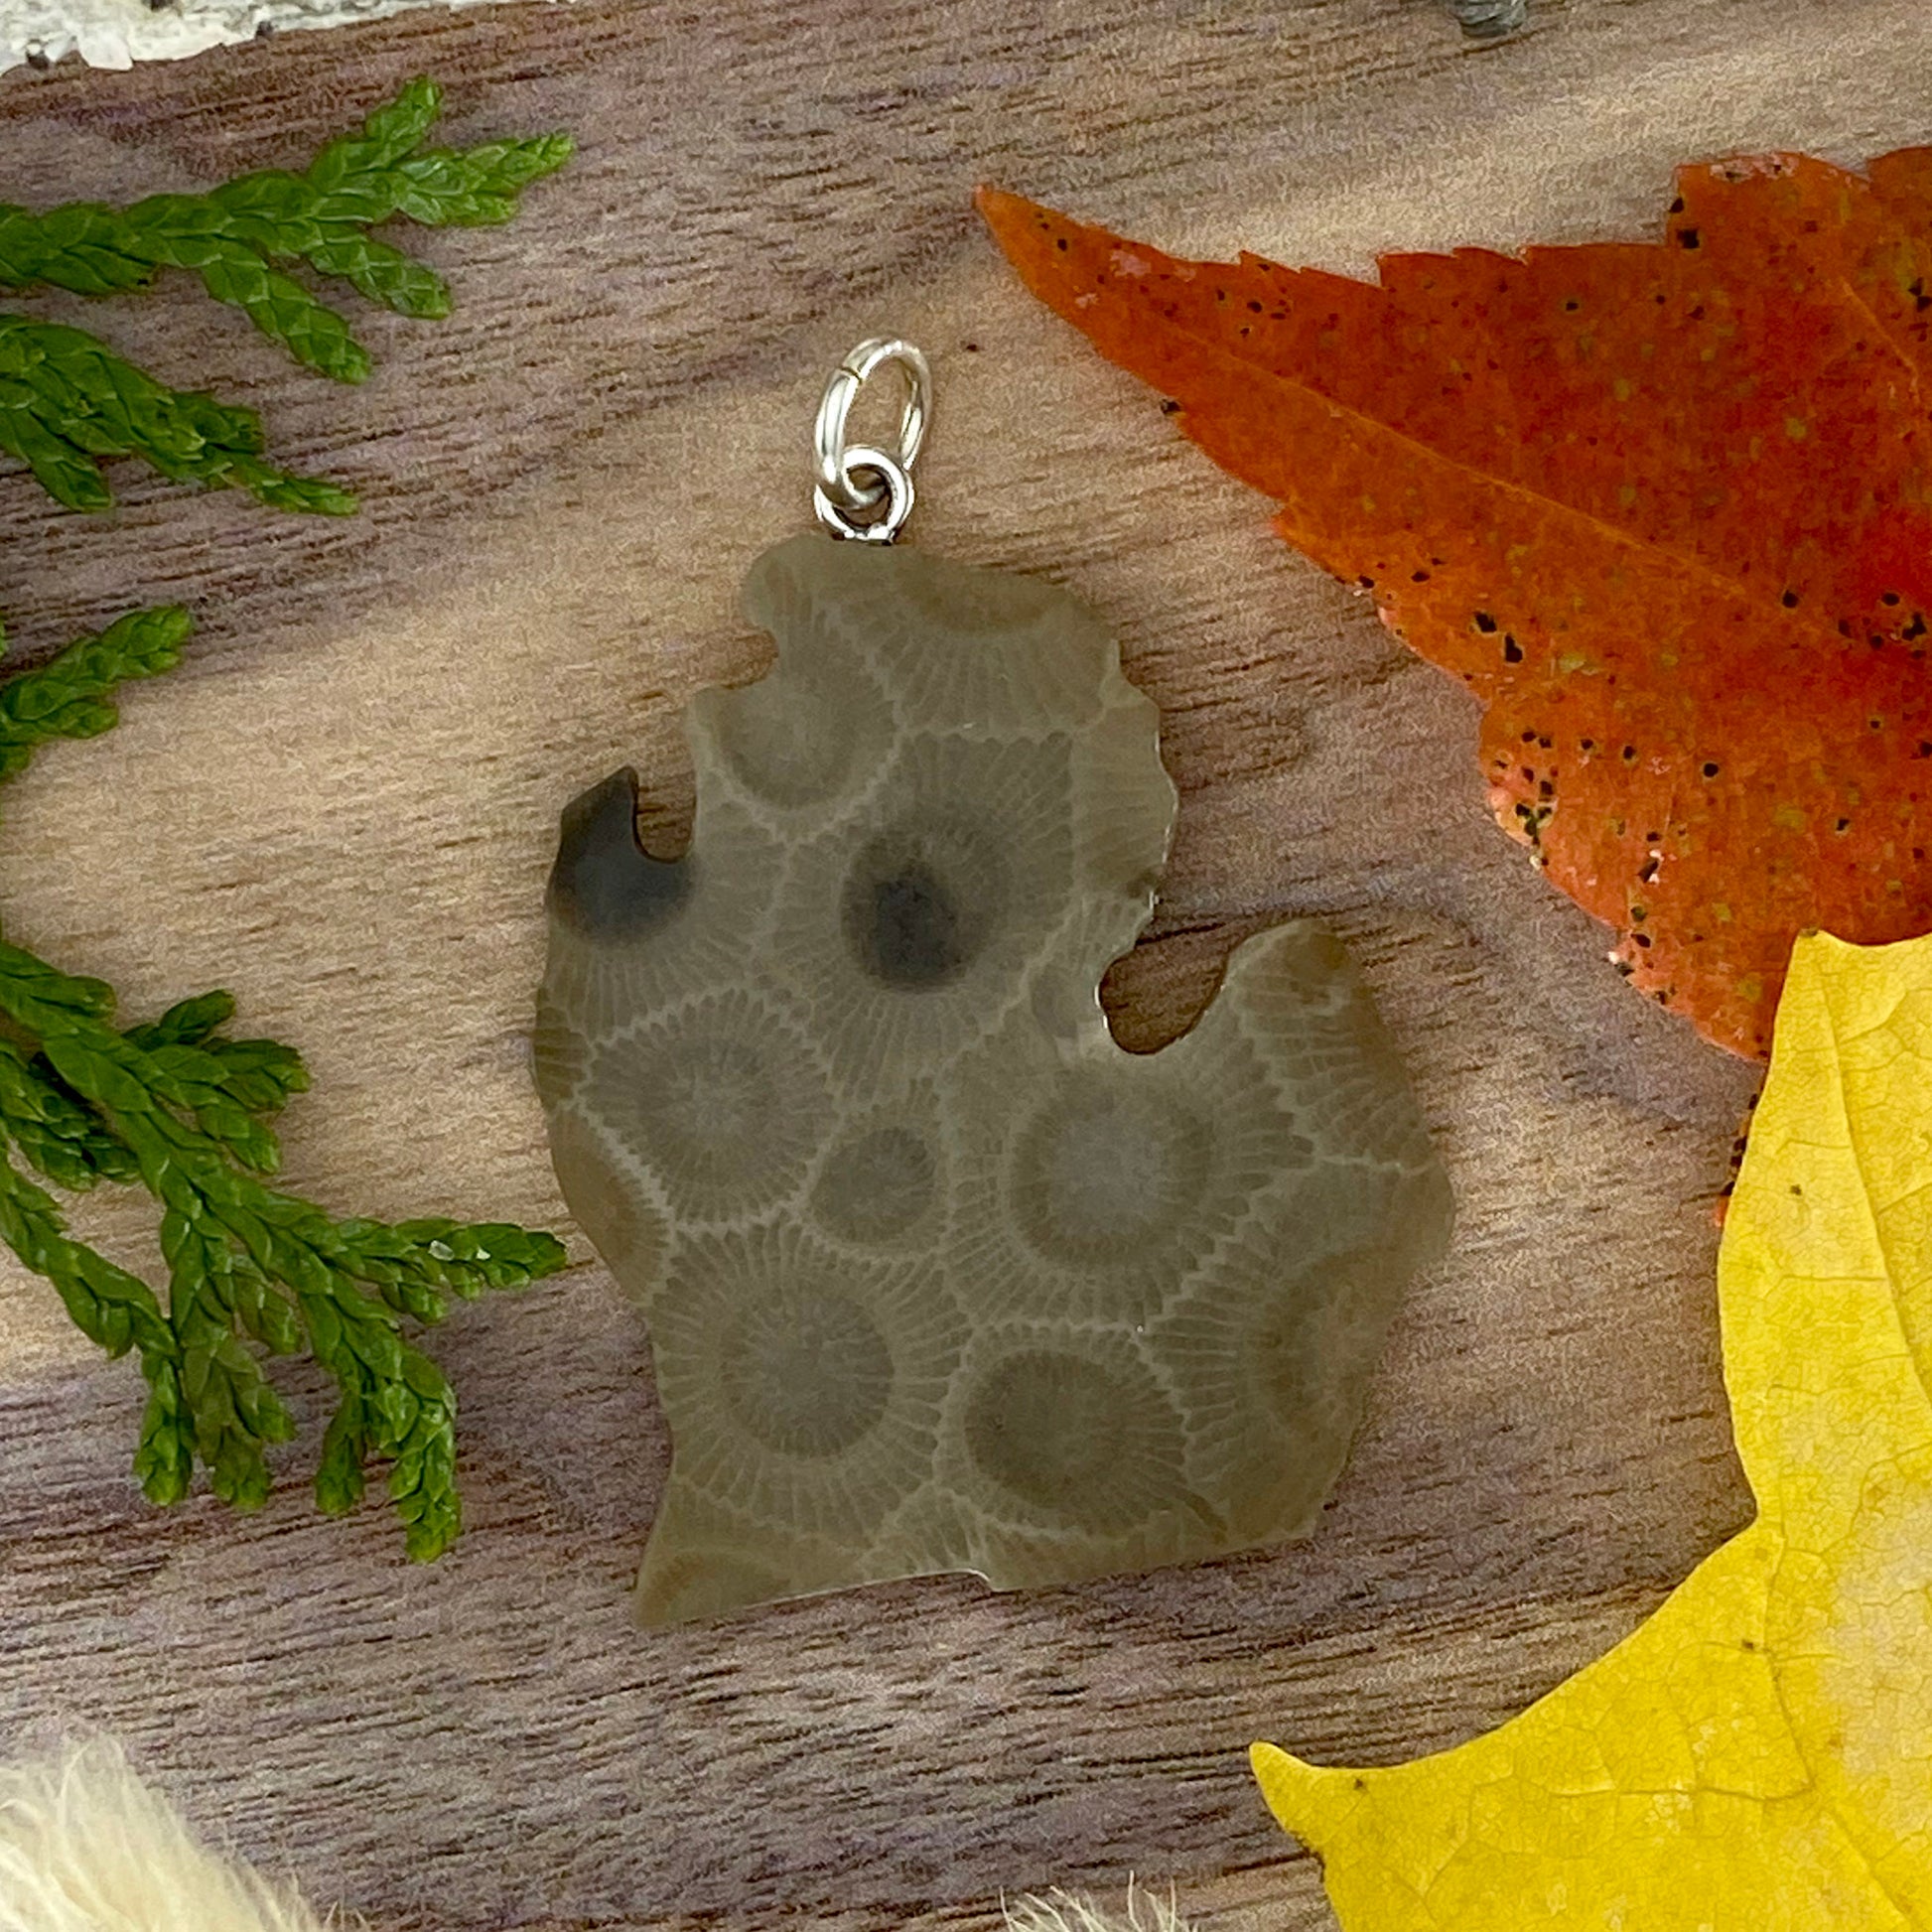 Michigan Shaped Petoskey Stone Pendant Front View - Stone Treasures by the Lake